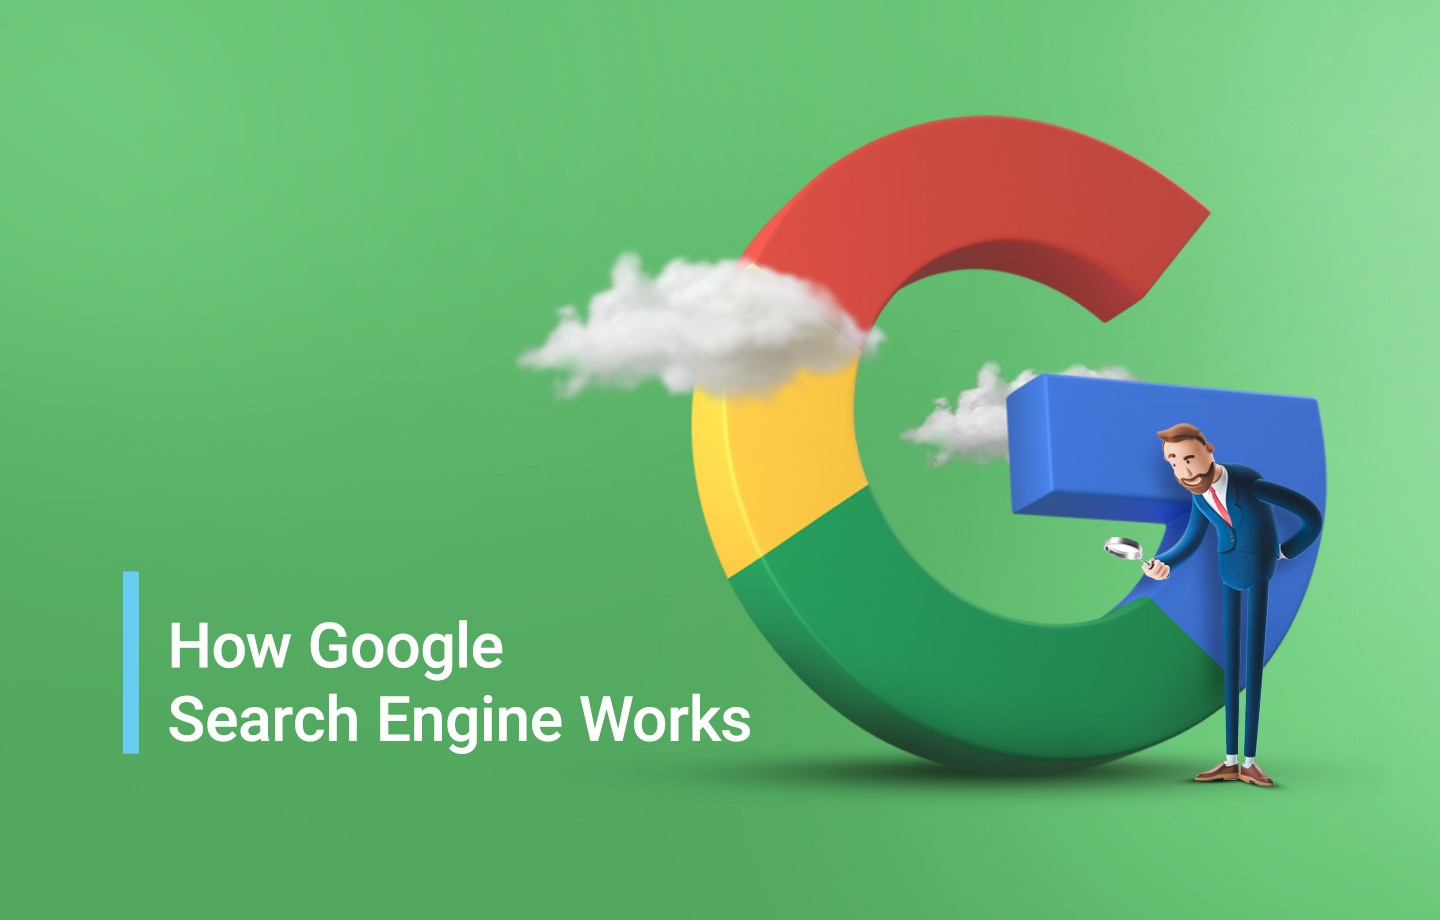 How Google Search Engine Works